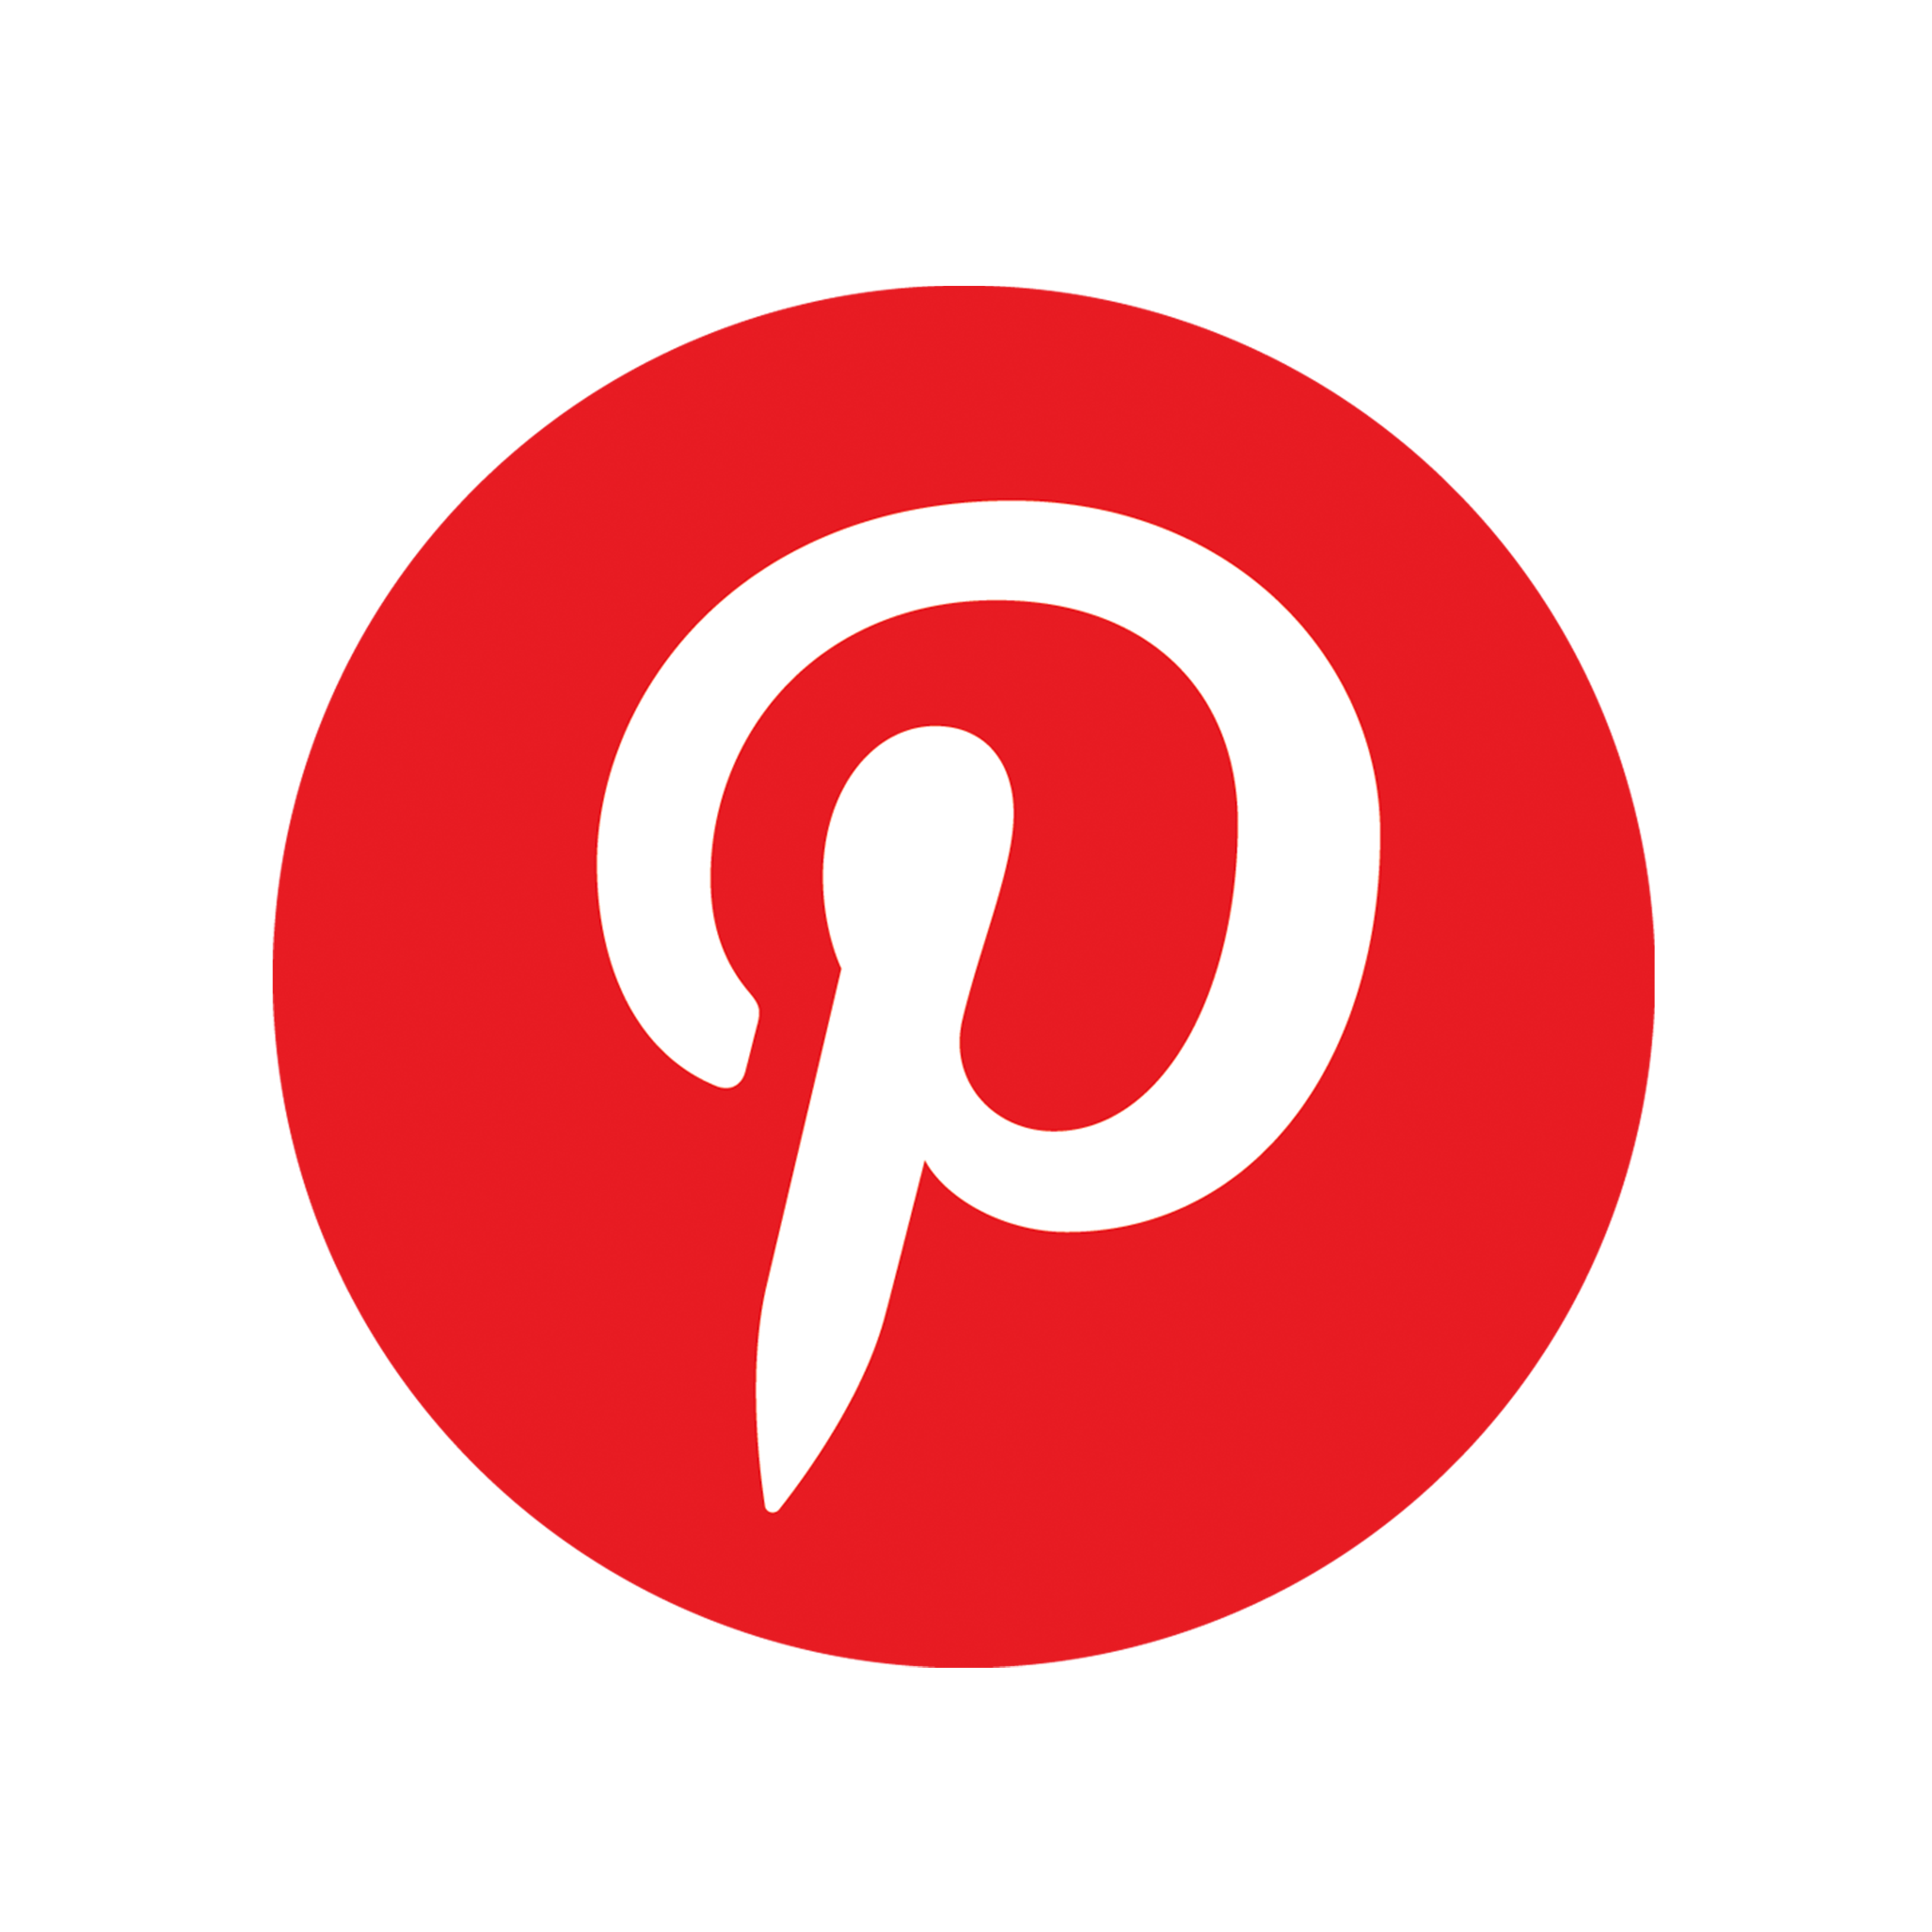 Libraria and Pinterest integration